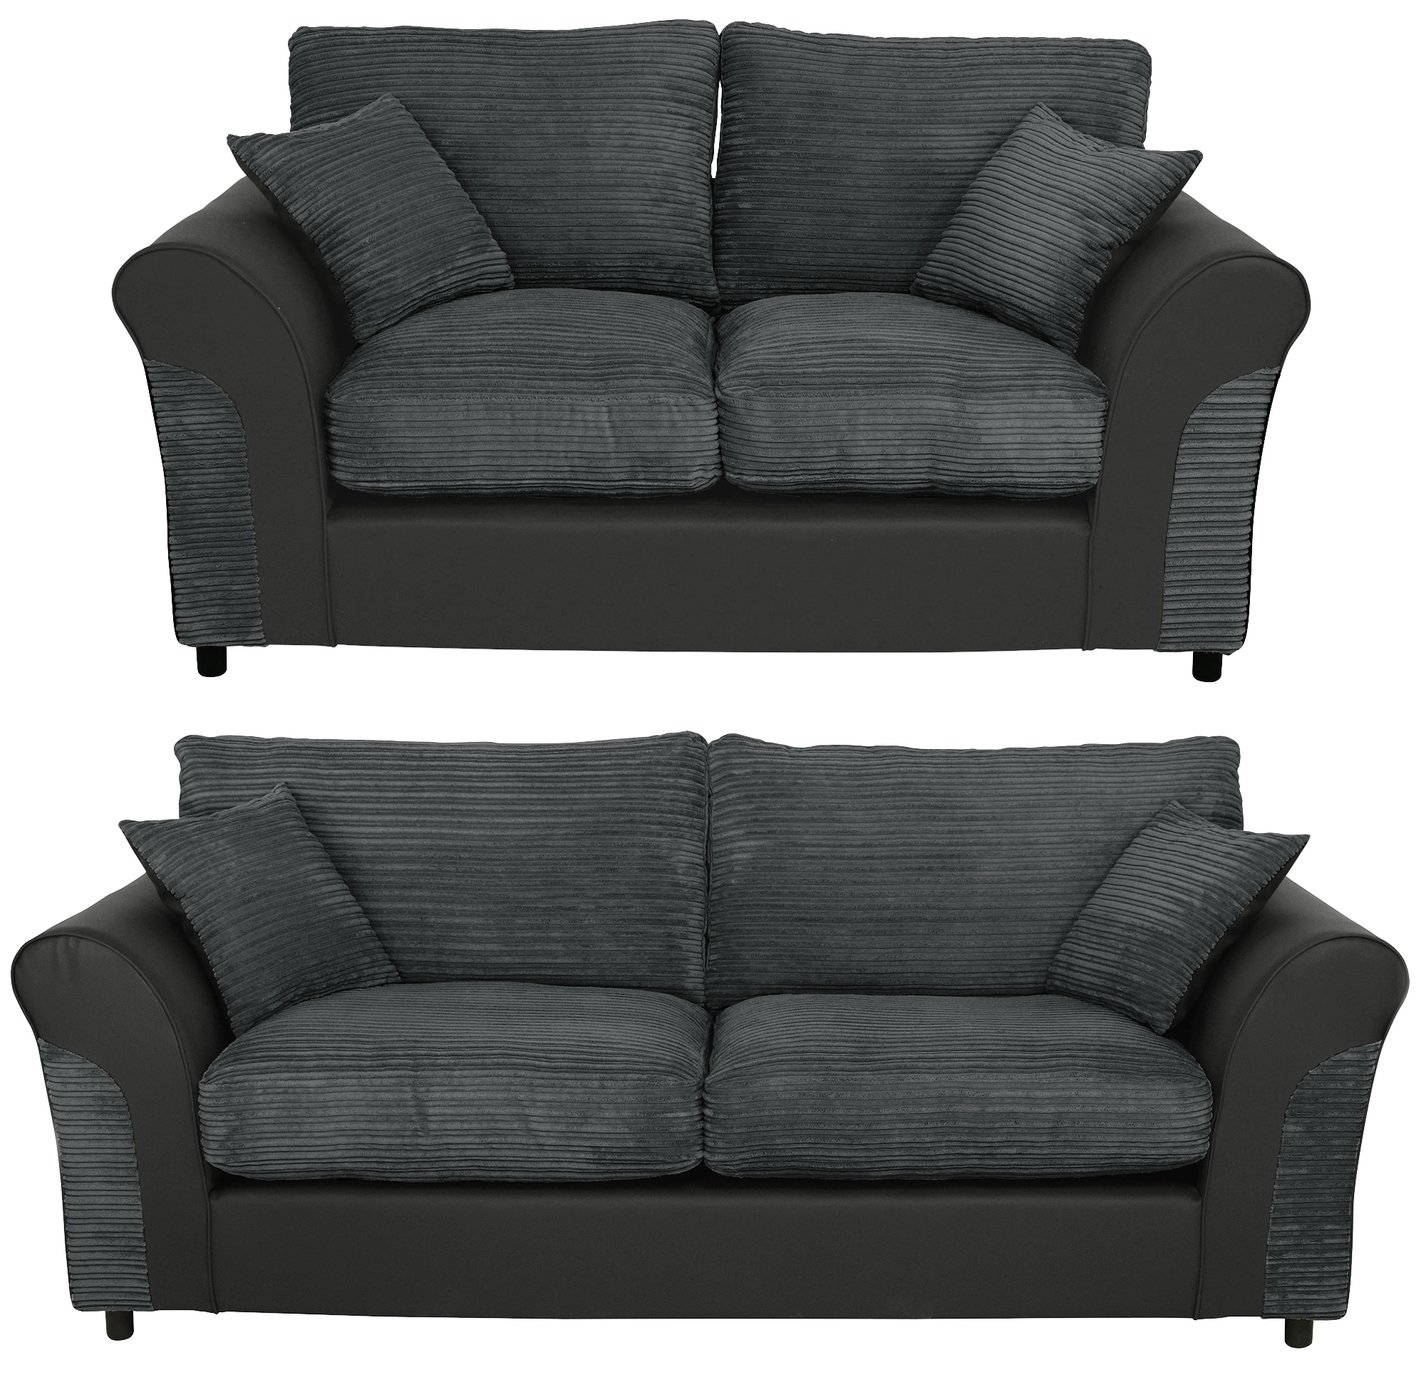 Argos Home Harry Fabric 2 Seater & 3 Seater Sofa - Charcoal